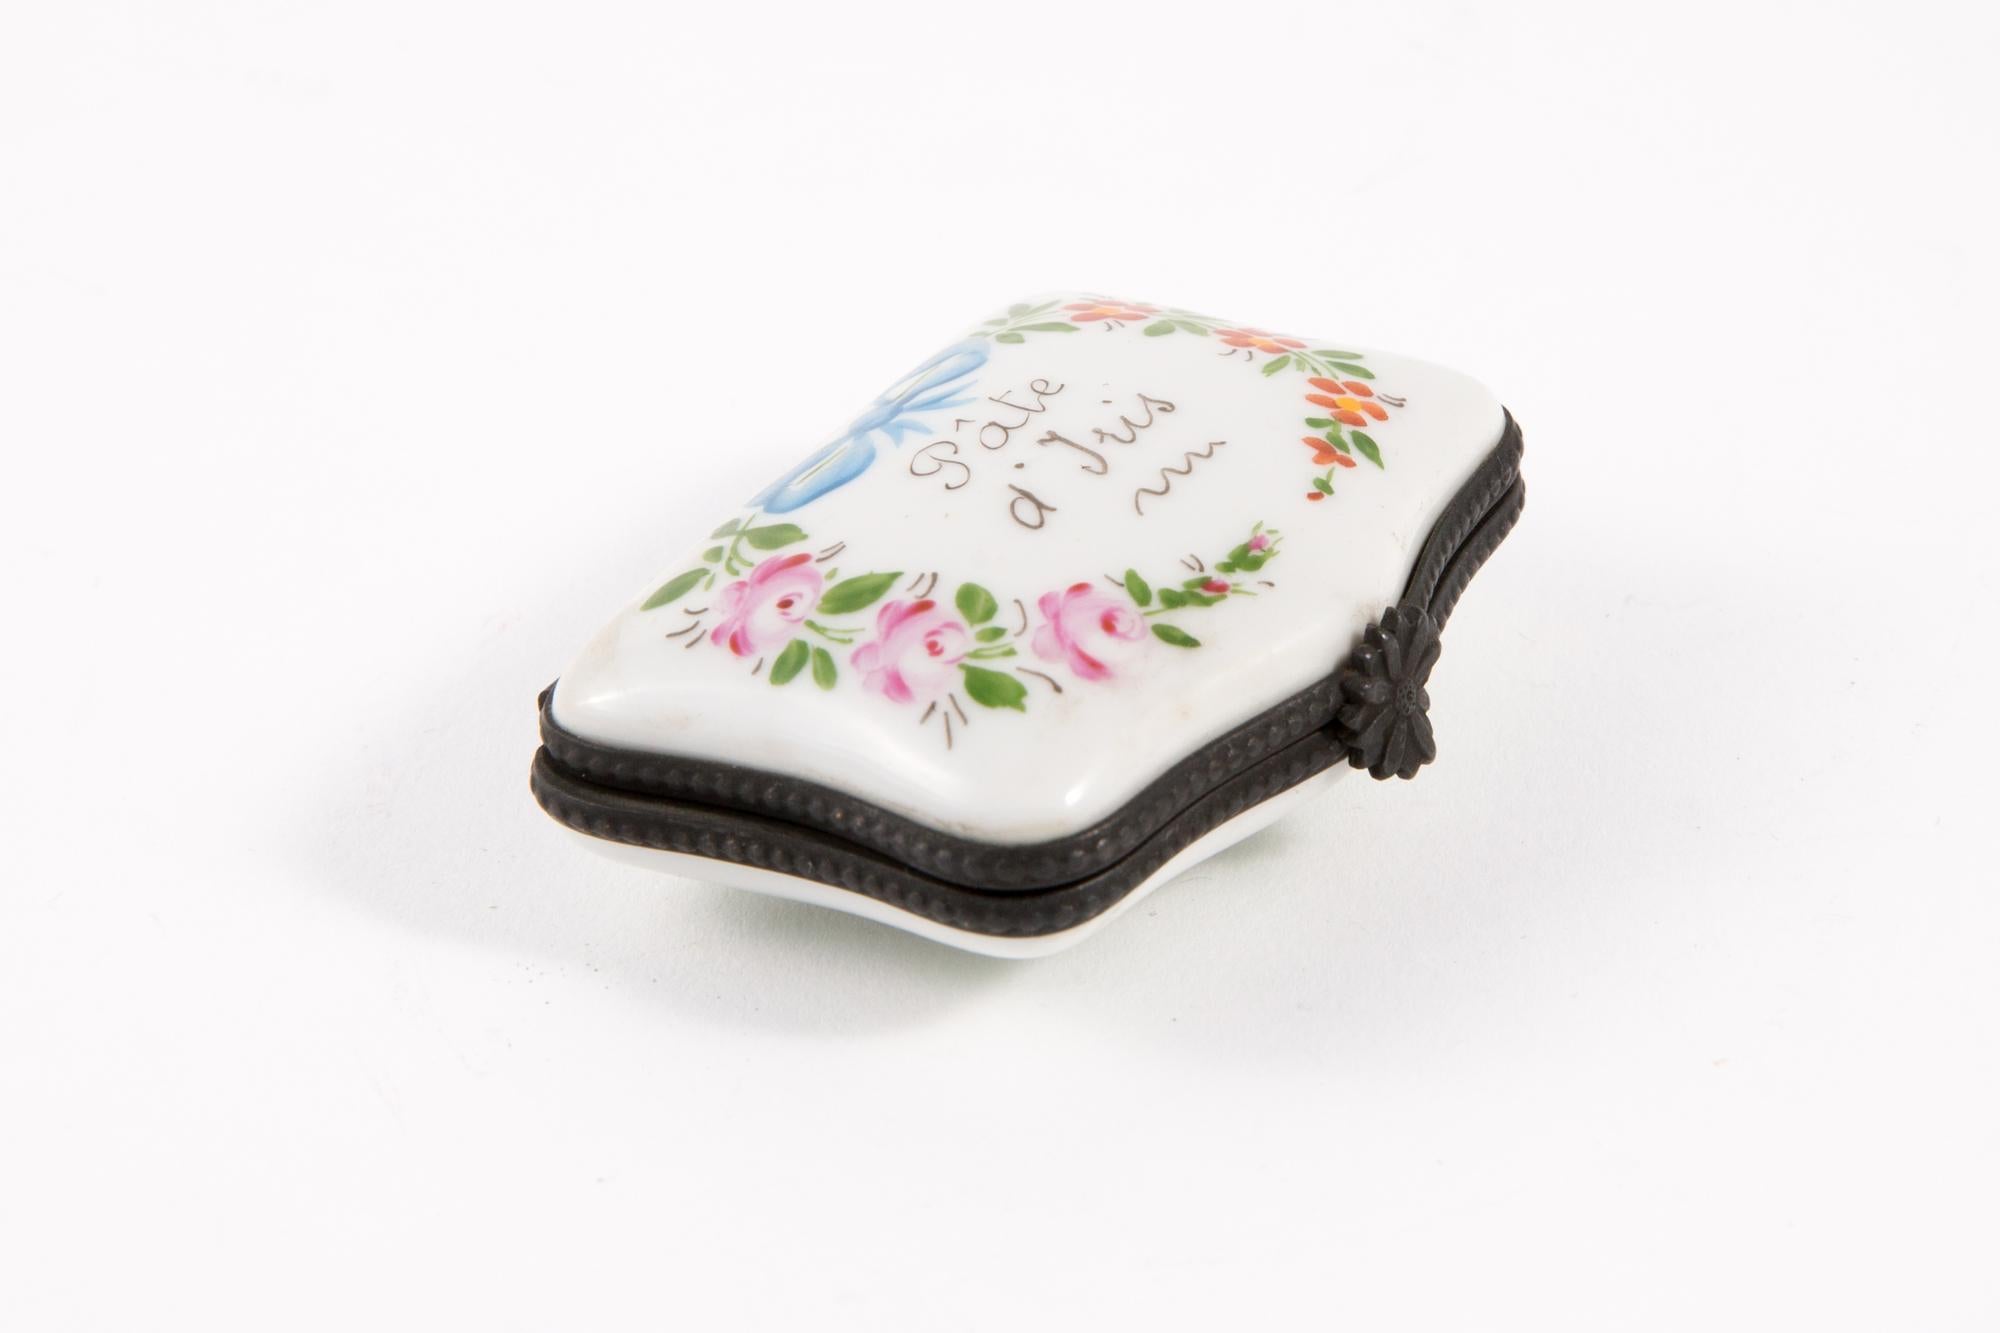 Porcelain Pâte d' Iris (soft extract) polychrome pill box featuring a metal frame, a flower claps, leaves painted inside and a polychrome floral decor and text. 
Hand Painted
In good vintage condition. 
Width 1.9in. (5cm)
Length 2.3in. (6cm)
Heigth: